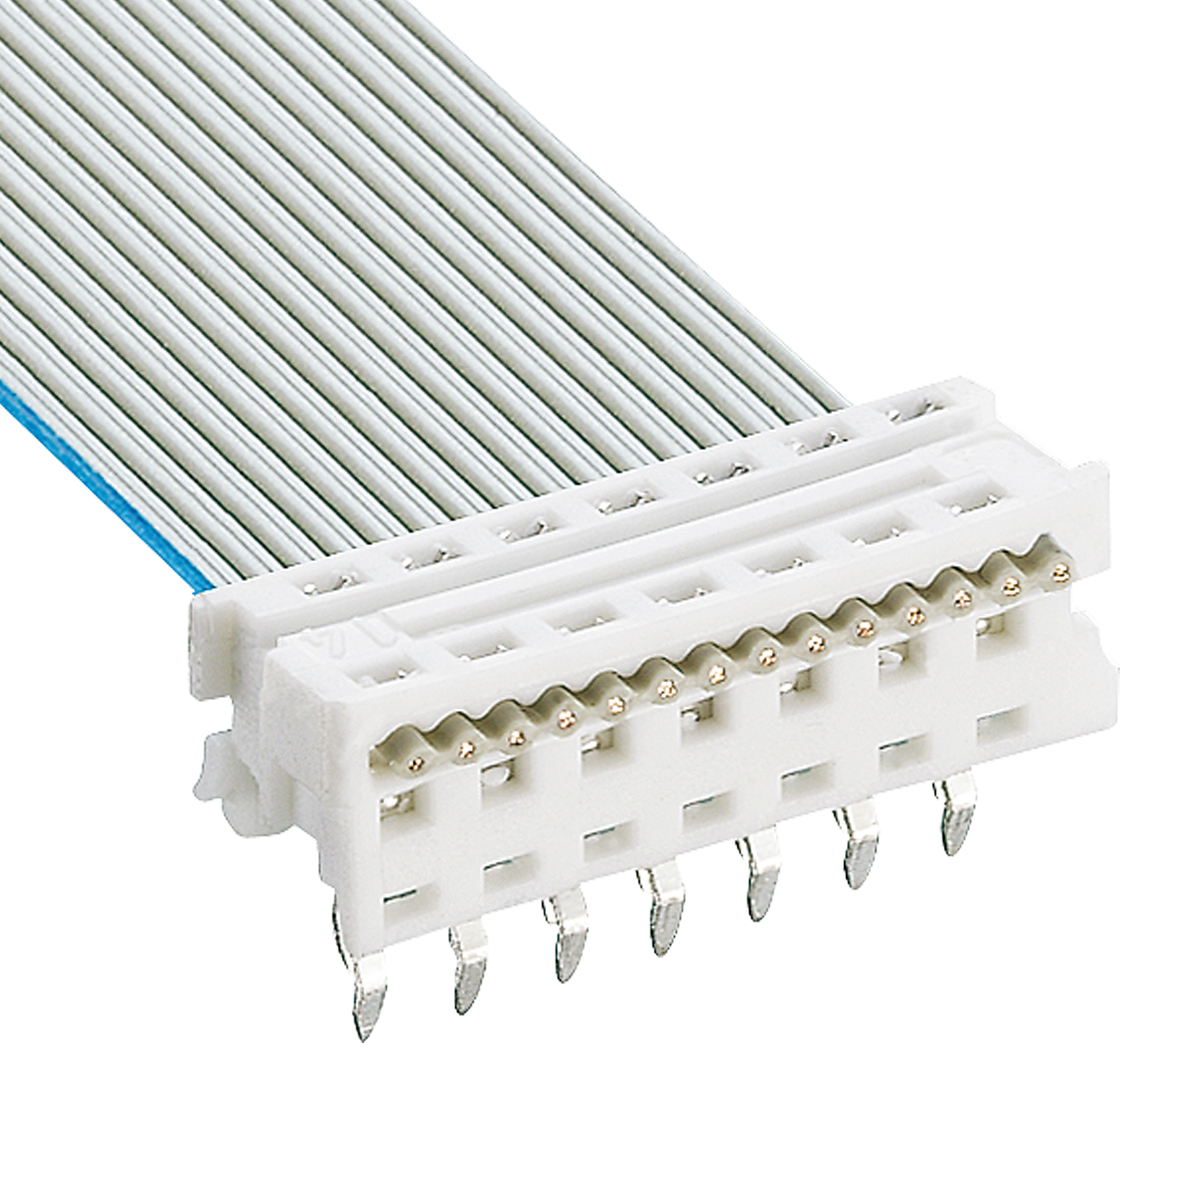 Lumberg: MICAL (Series 30 | Micromodul™ connectors, pitch 1.27 mm)